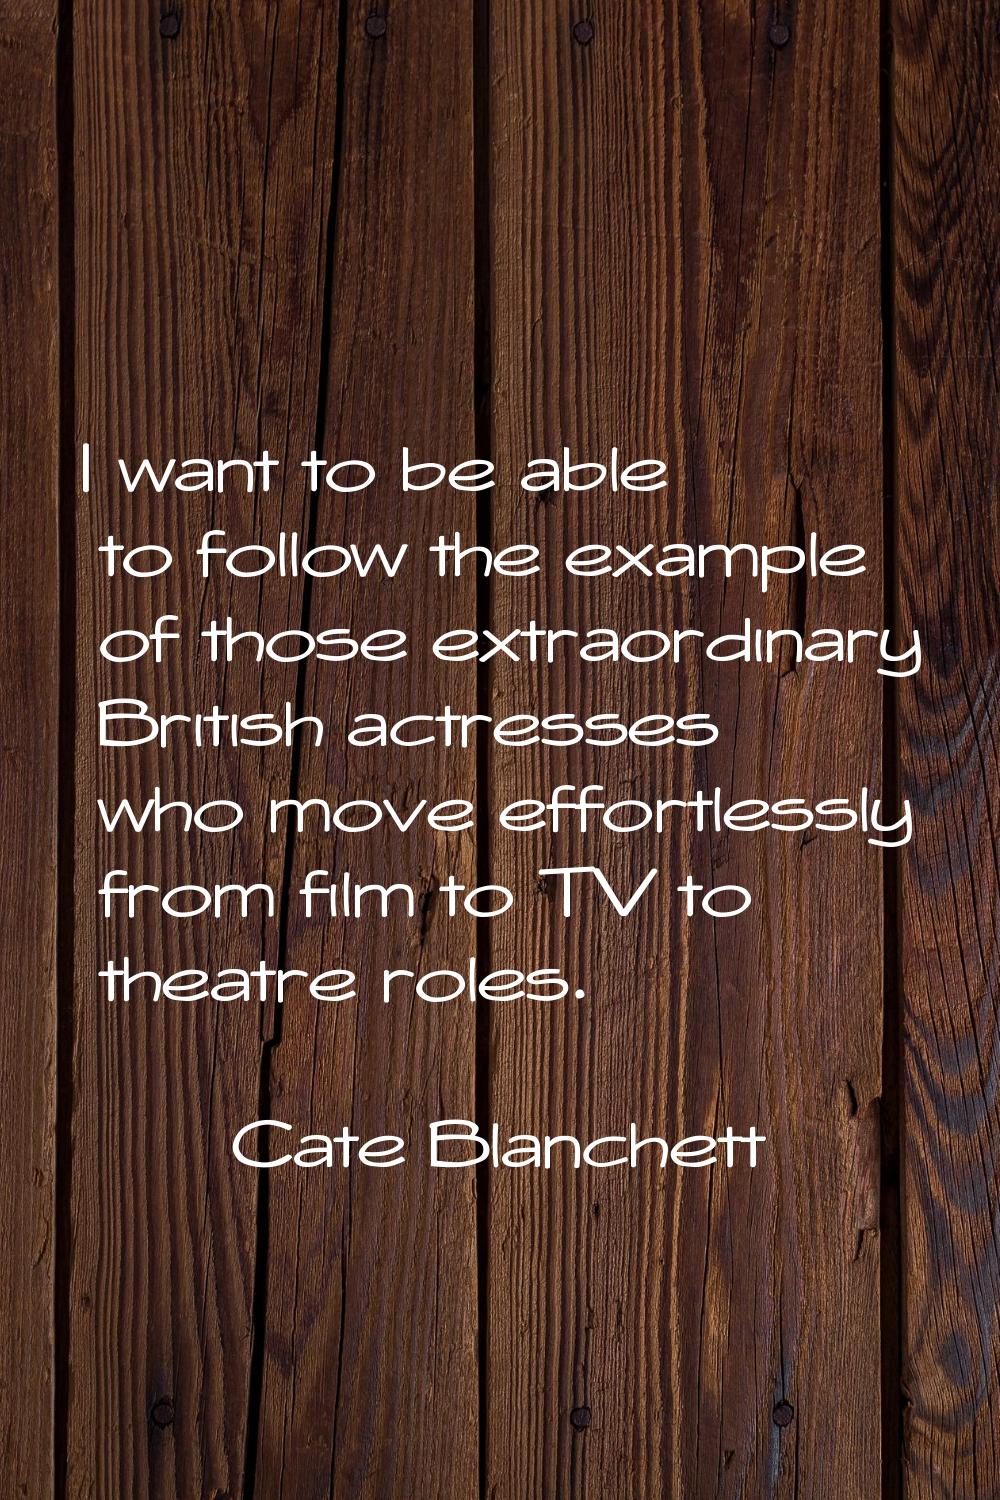 I want to be able to follow the example of those extraordinary British actresses who move effortles